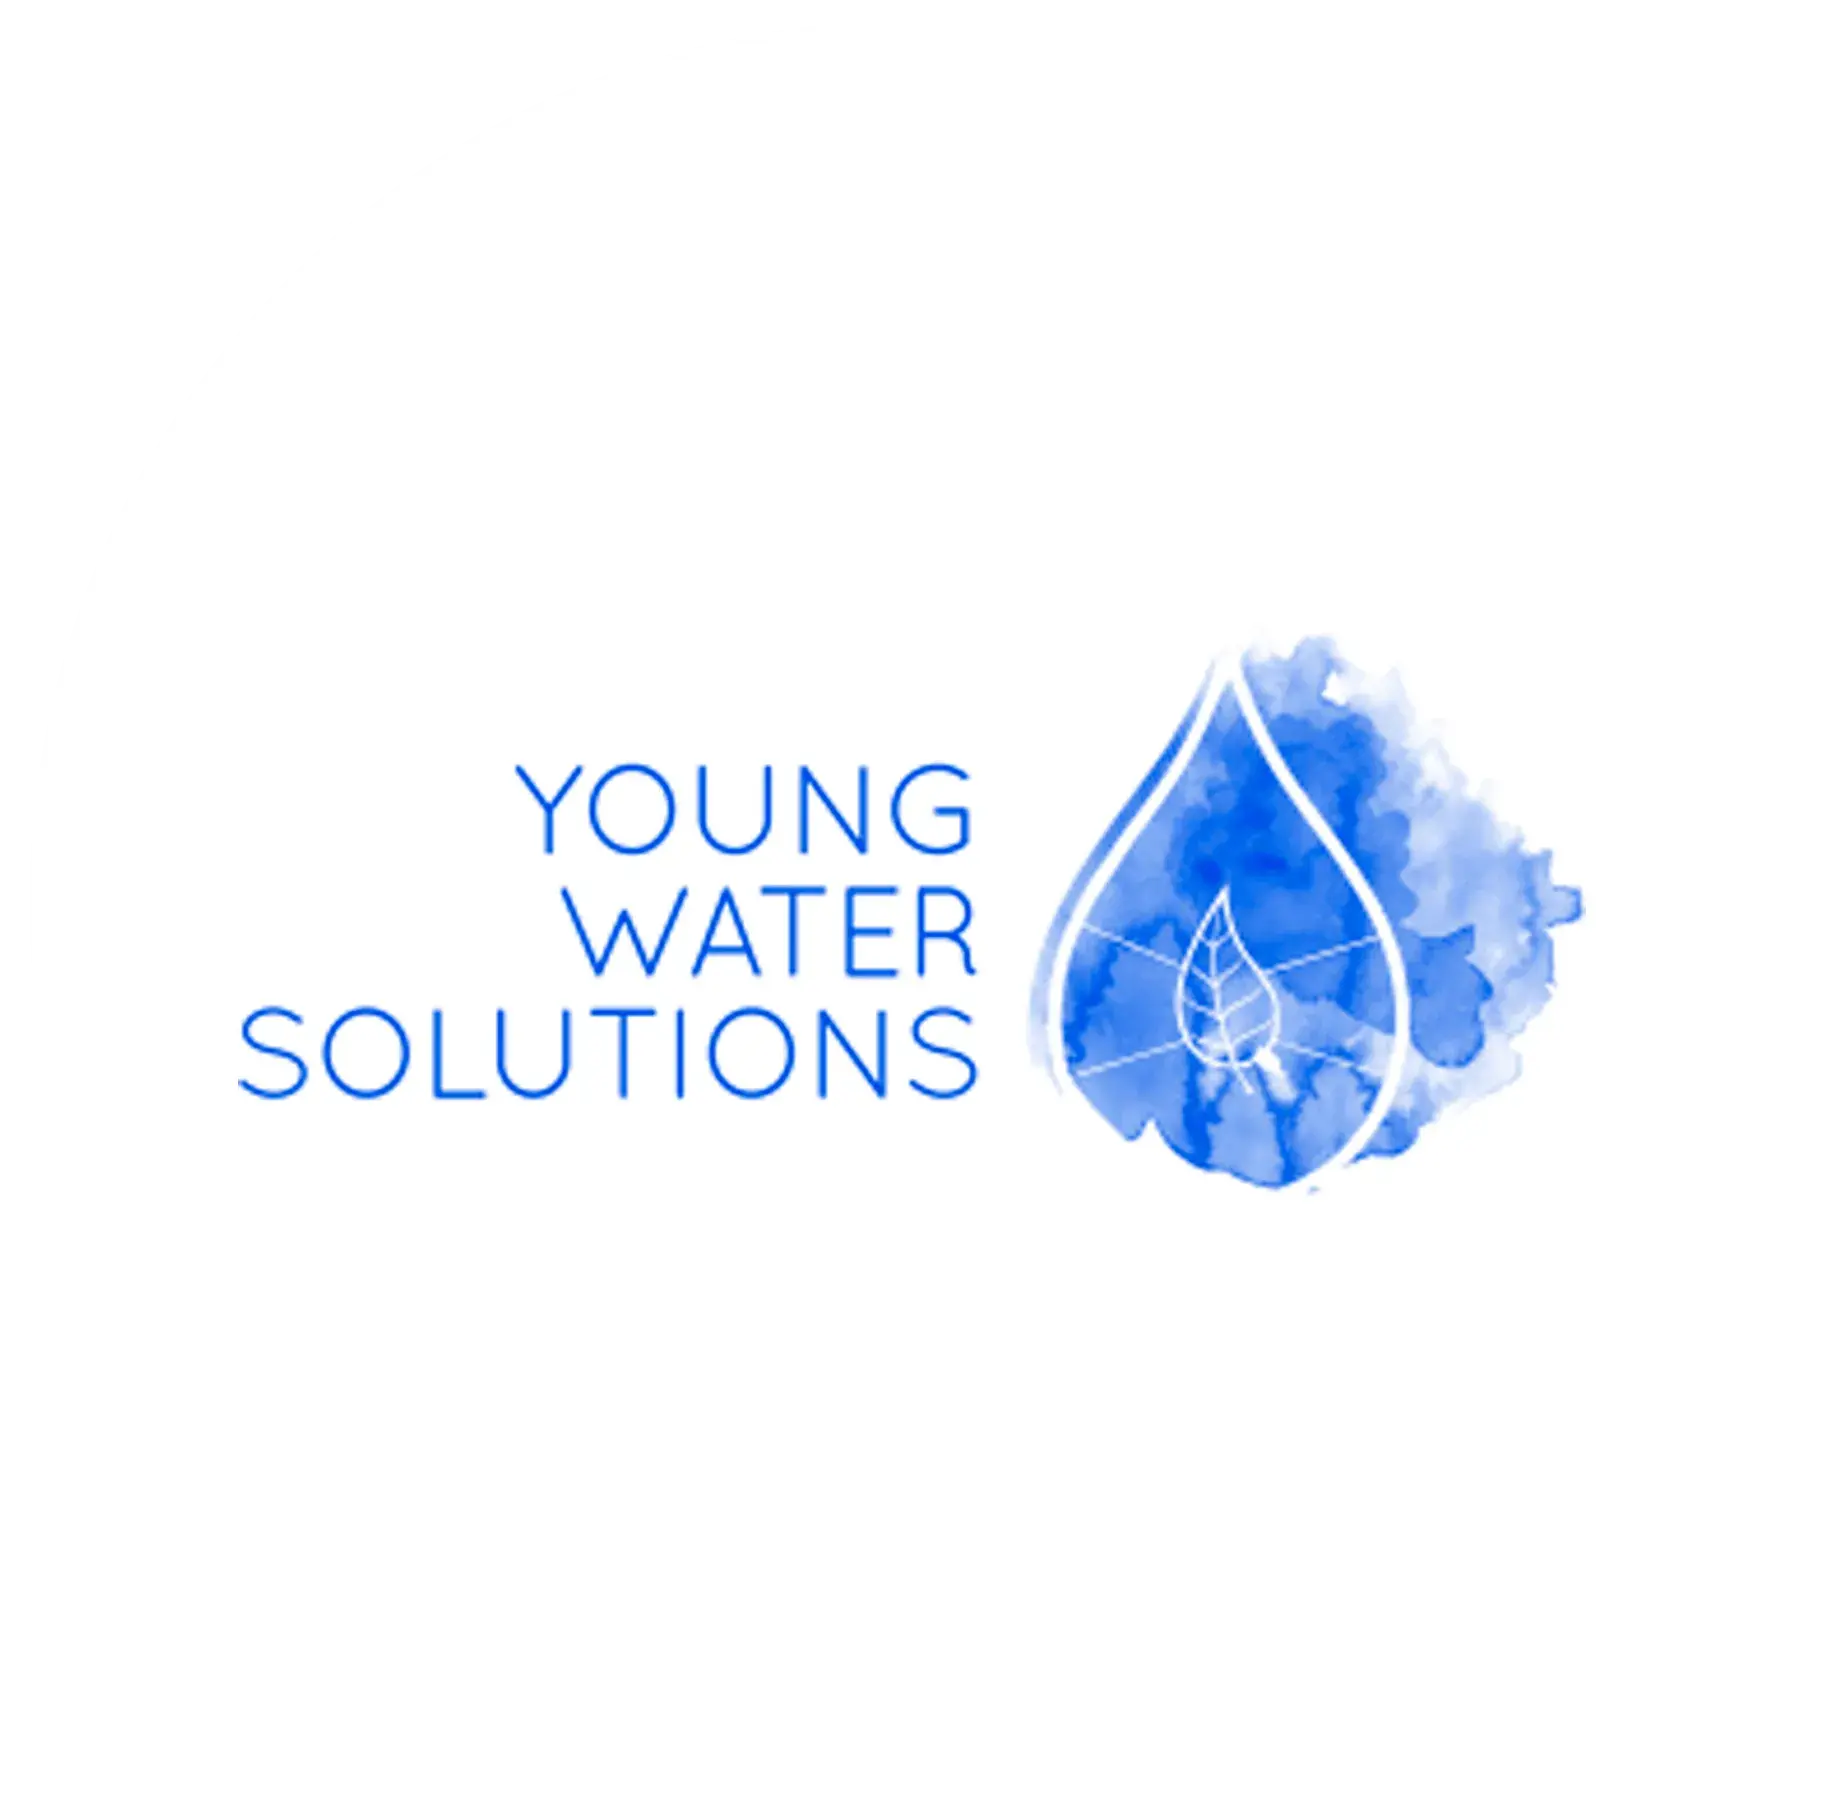 4. Young Water Solutions